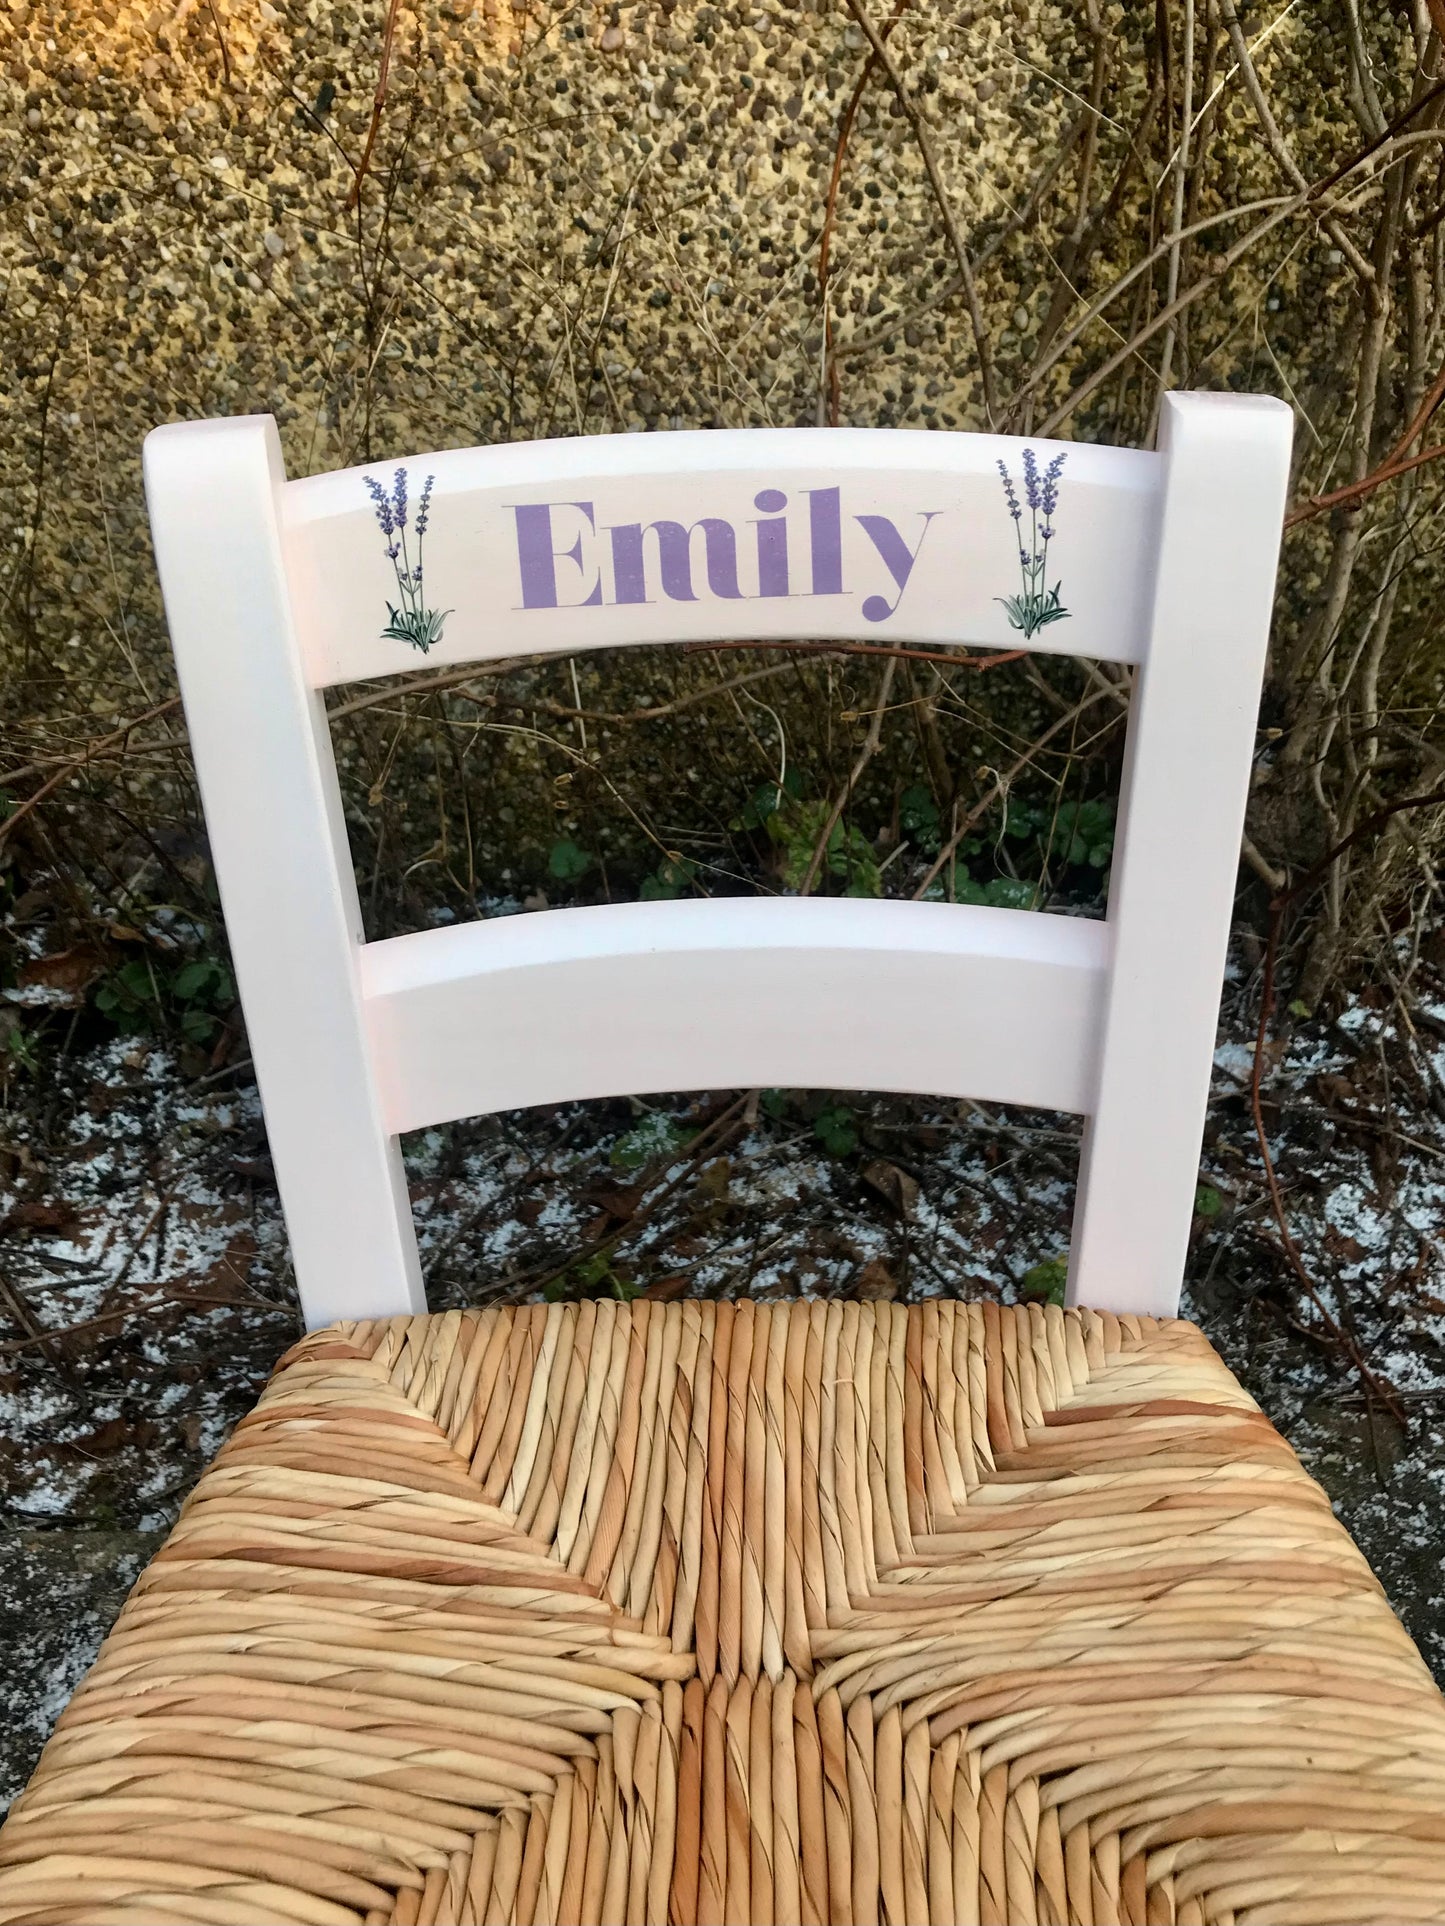 Rush seat personalised children's chair - Flower elements theme - made to order